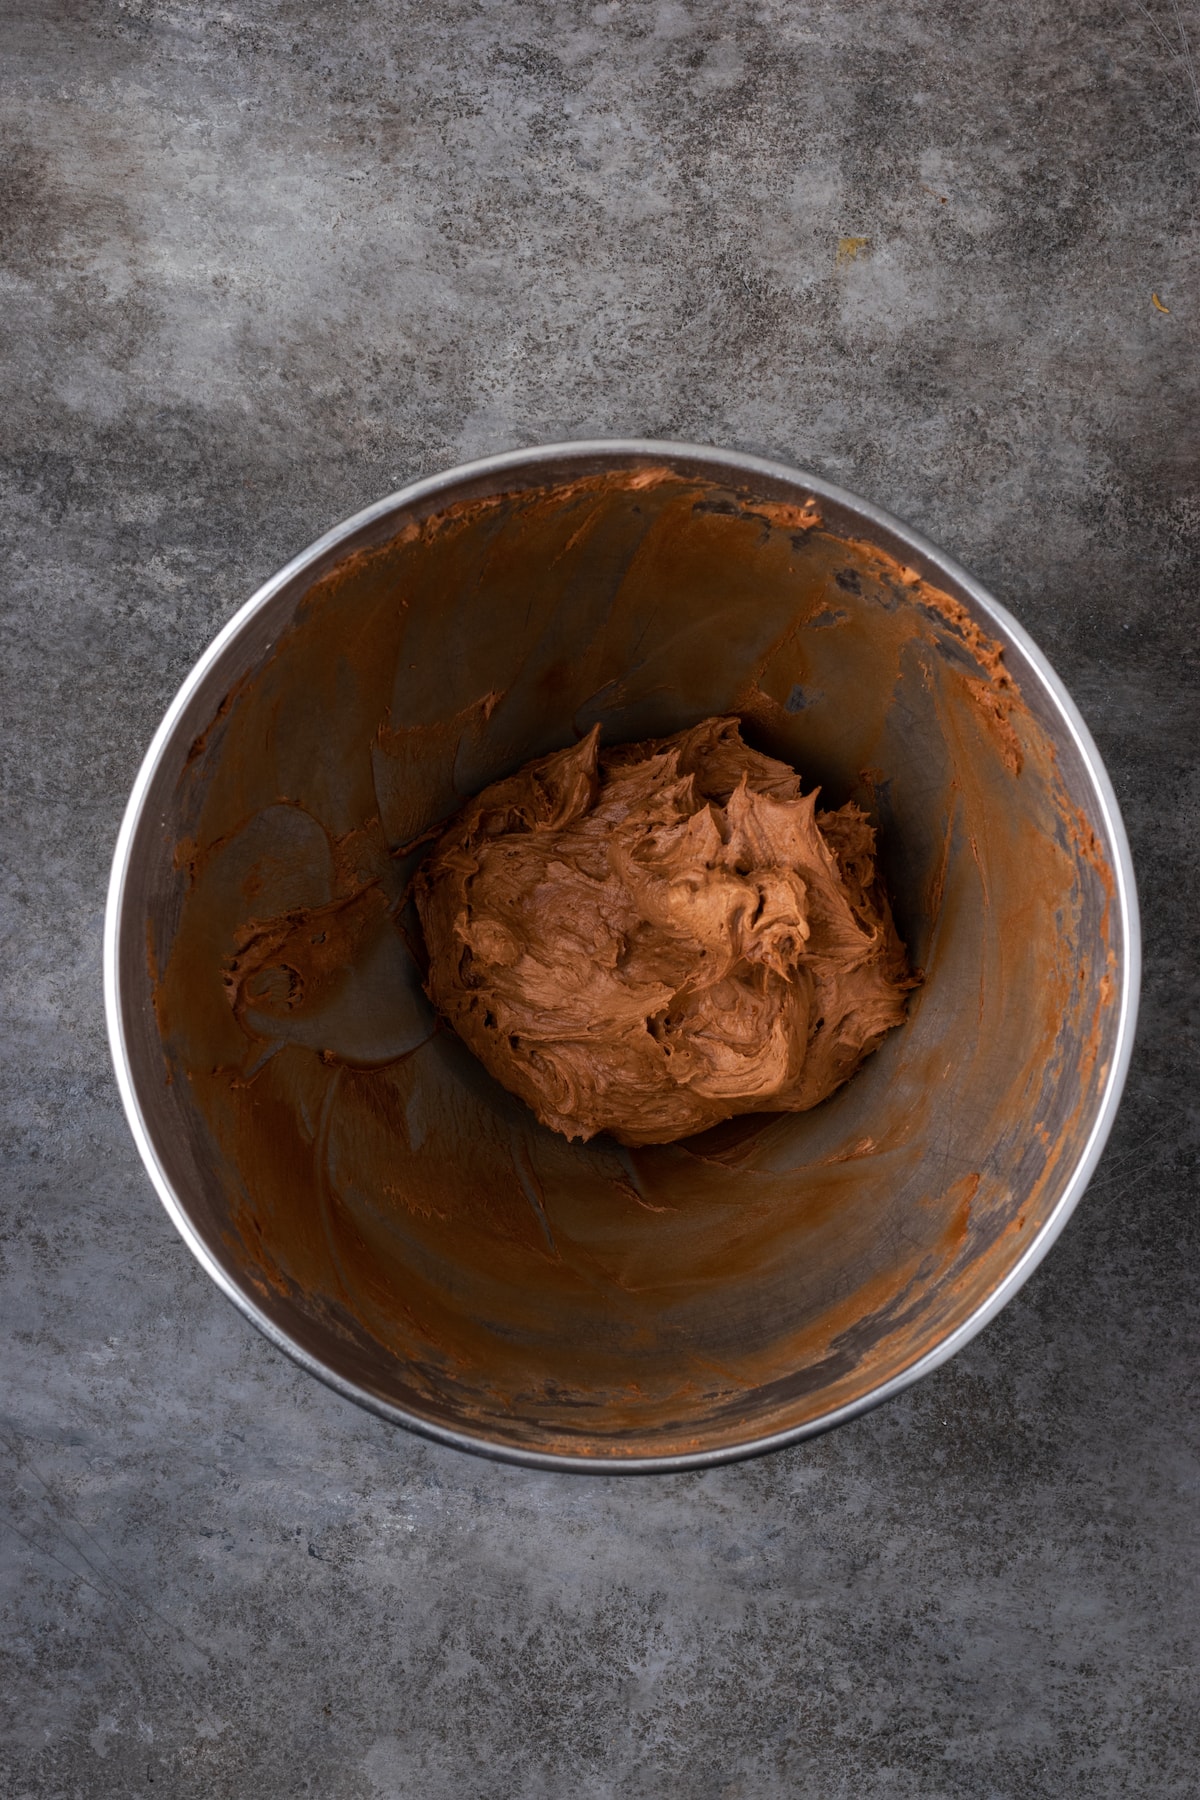 Creamy chocolate frosting in a mixing bowl.